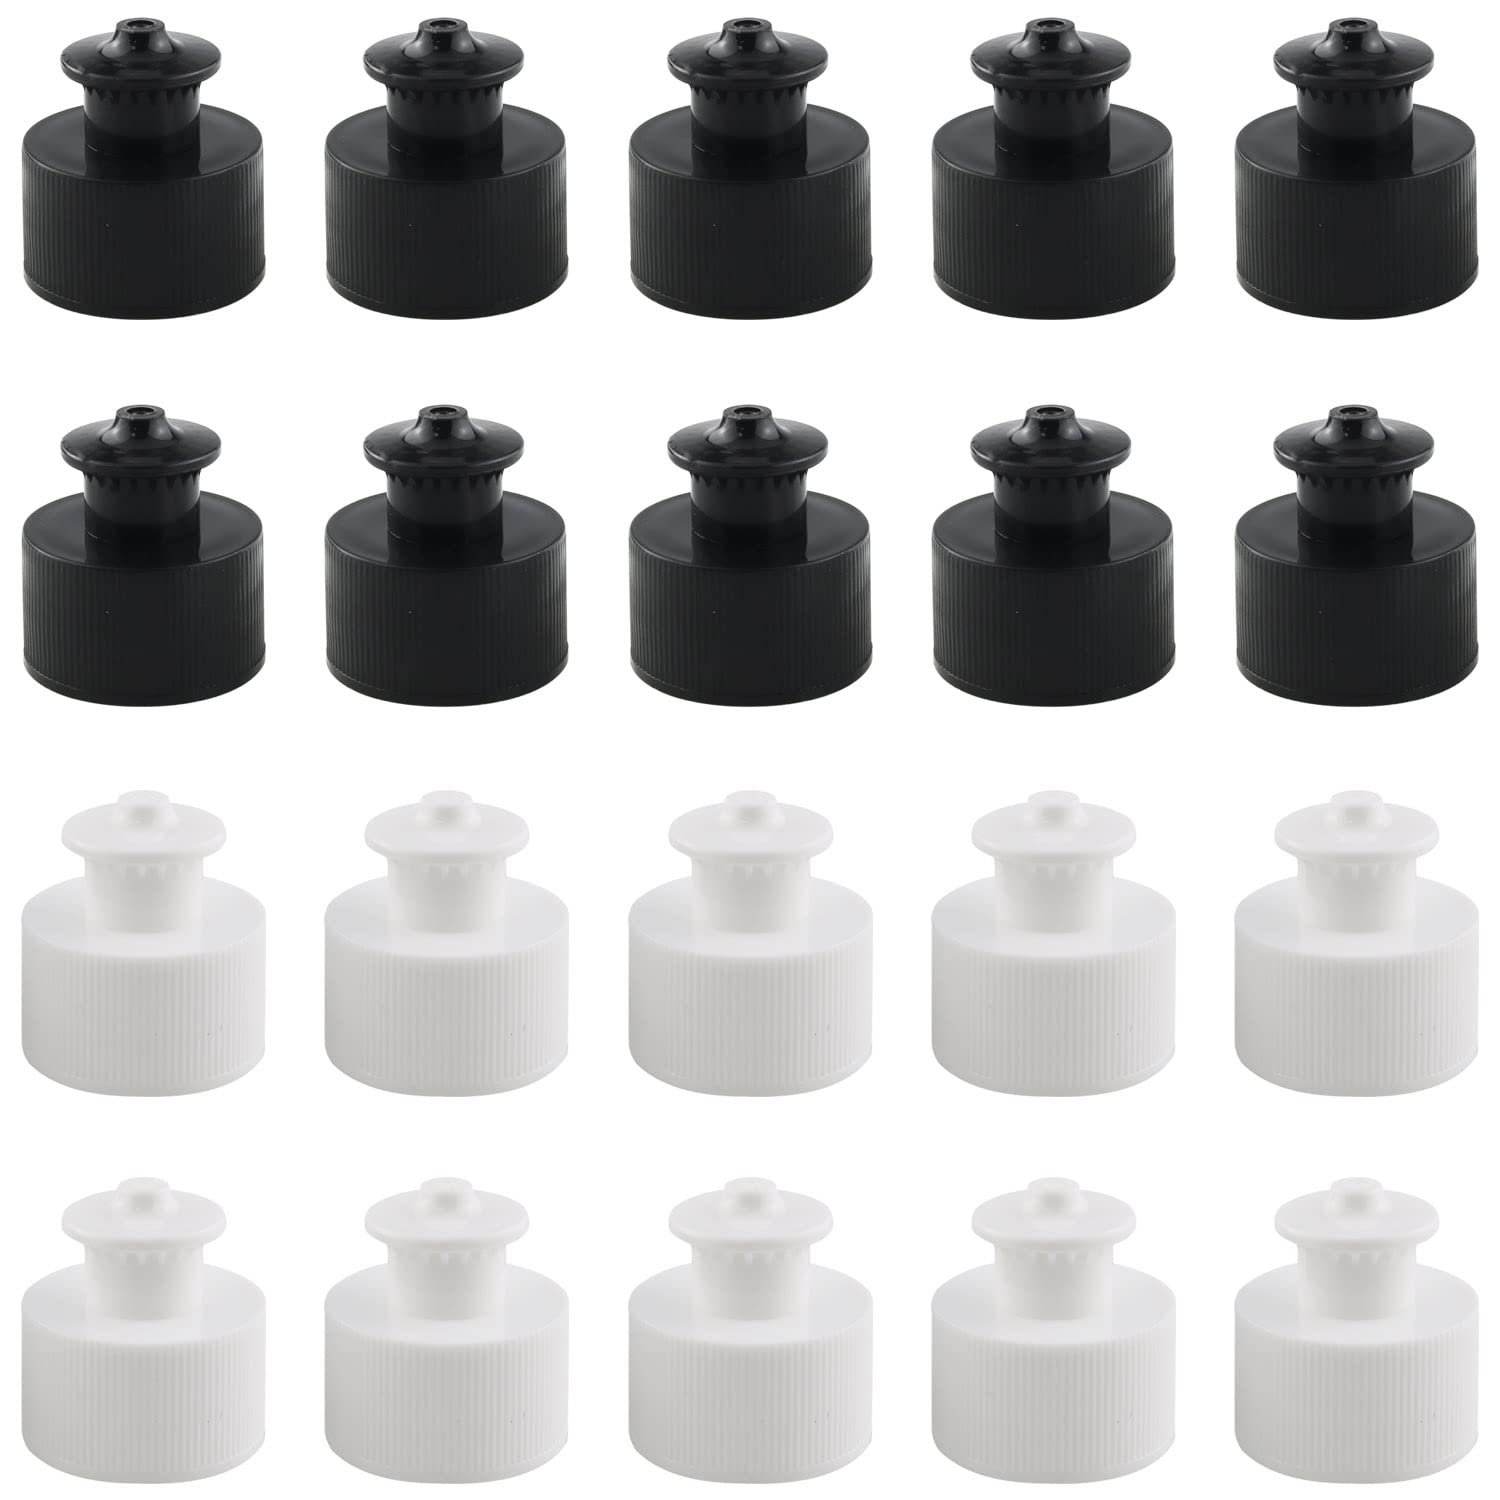 WHYHKJ 20PCS 28mm Water Bottles Push Pull Caps Sports Water Bottle Cap Replacement Top Hand Pull Cap(10 white, 10 black)